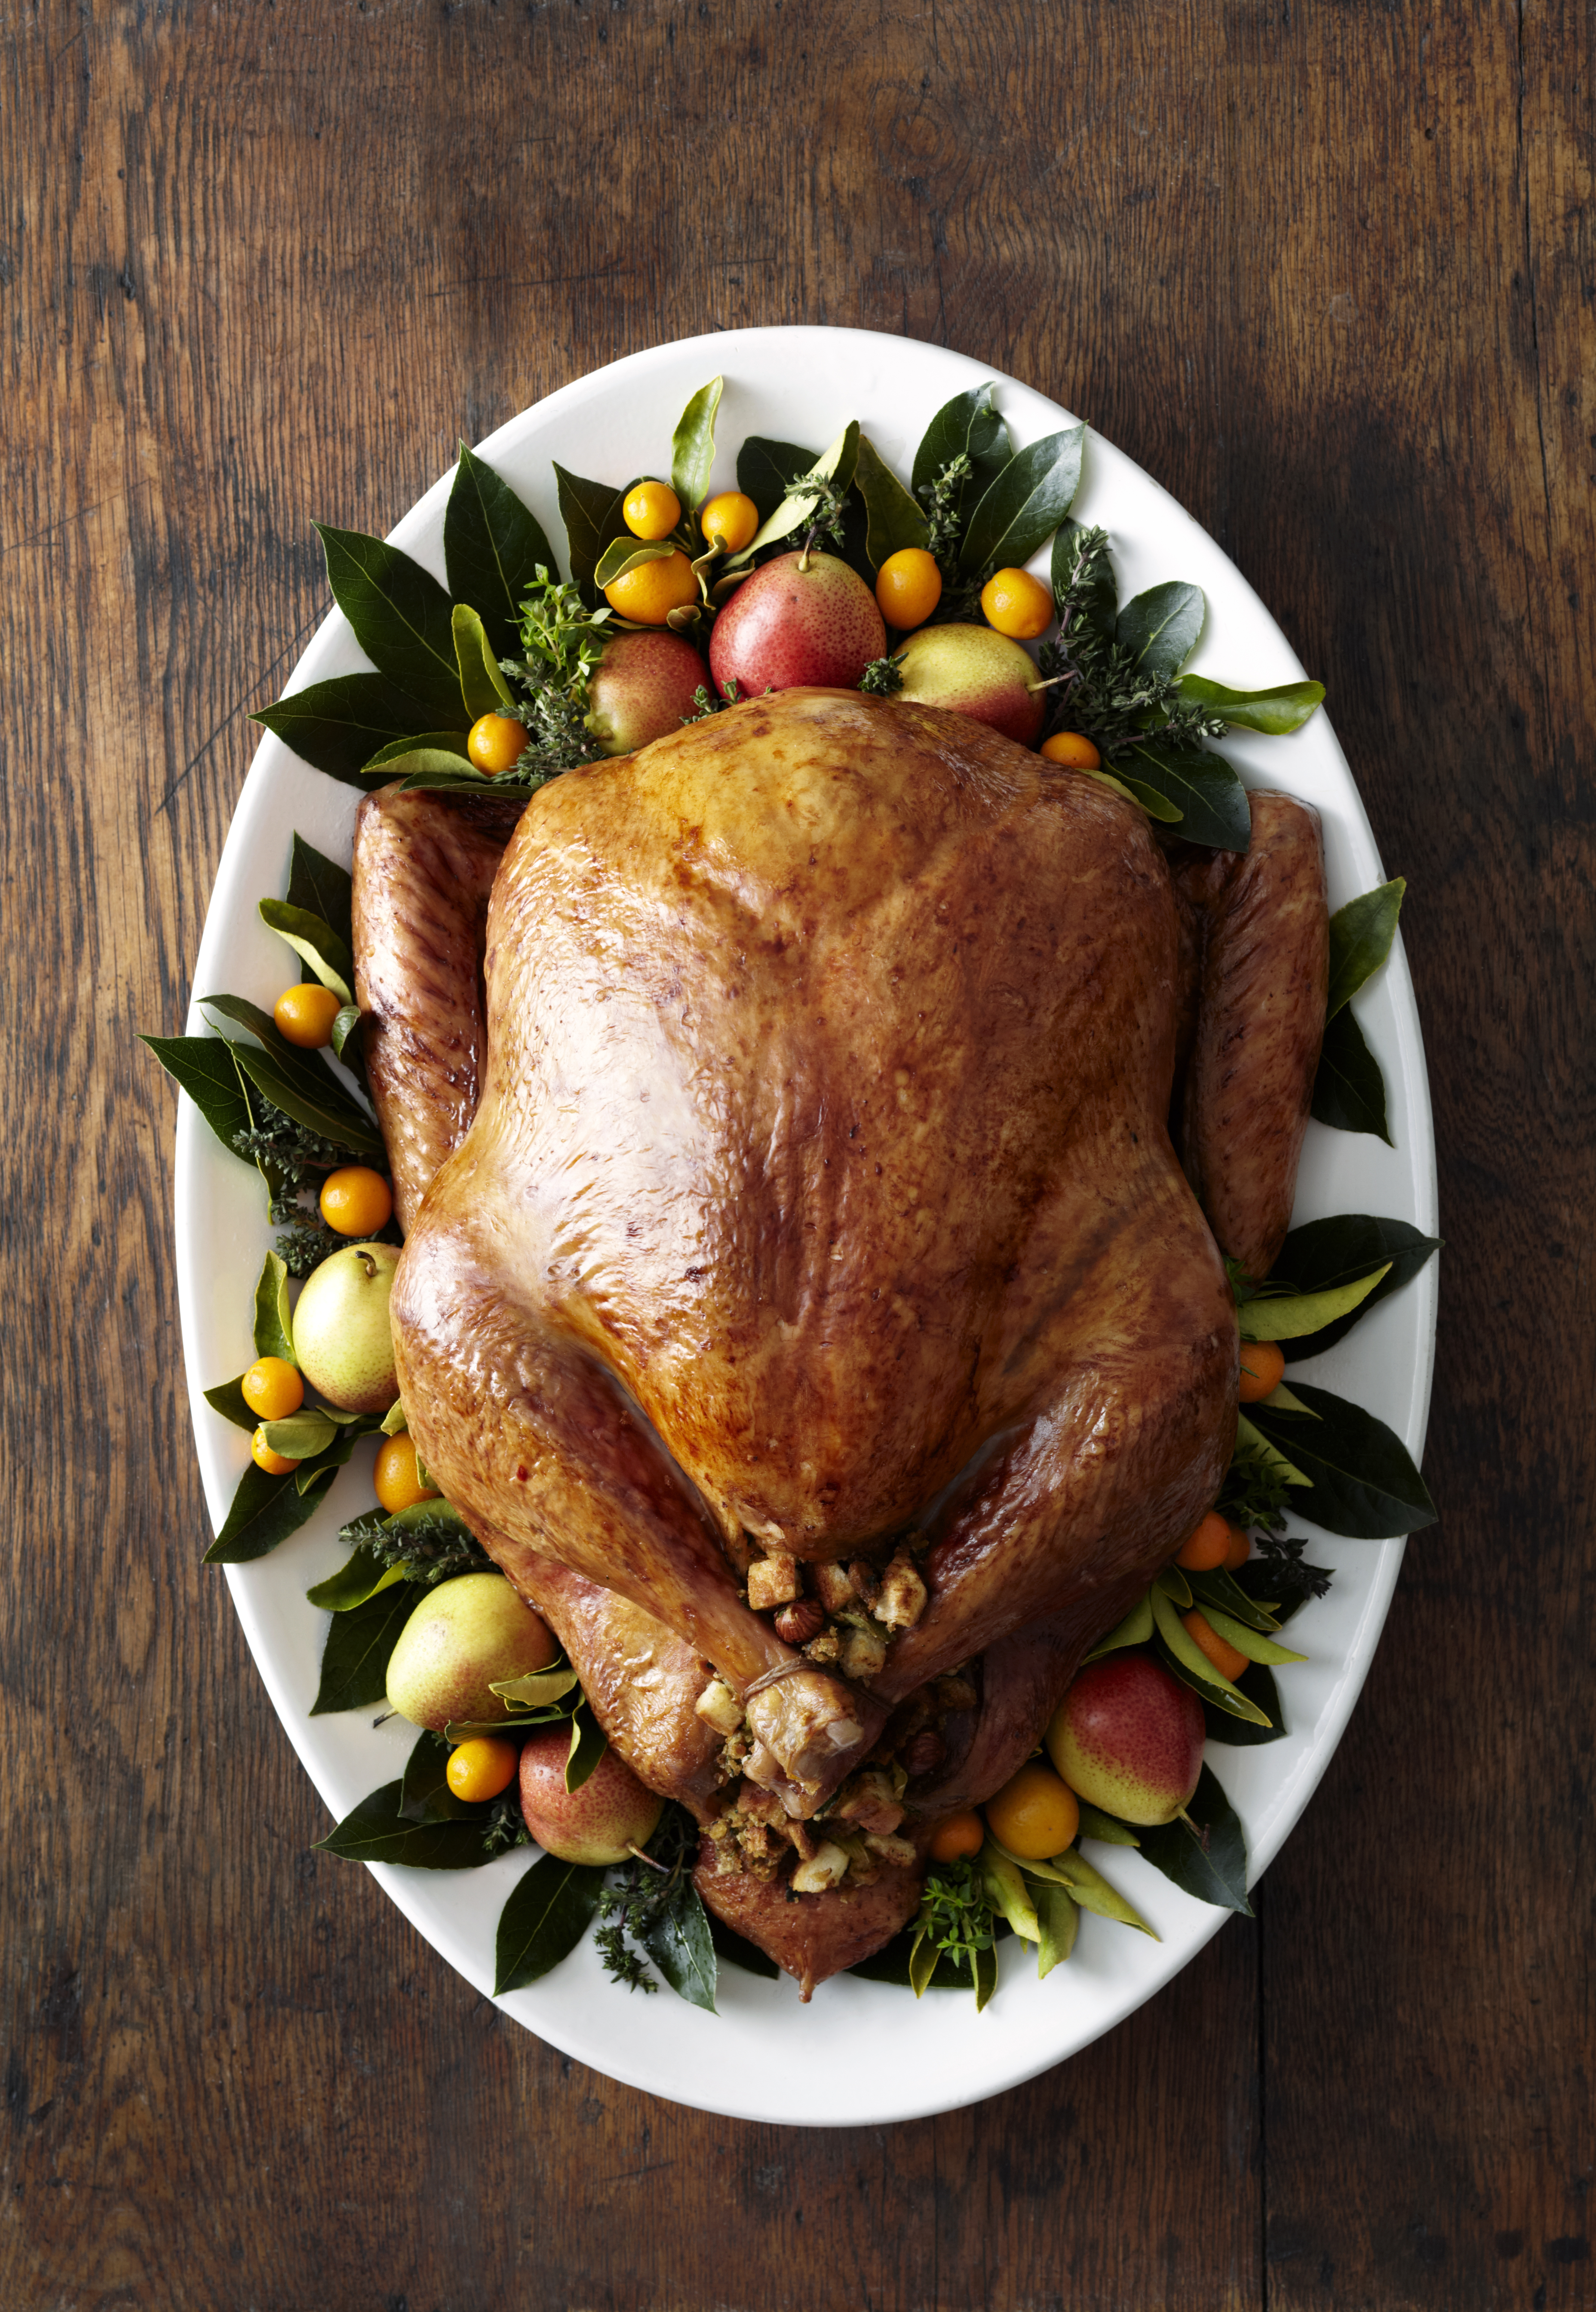 Thanksgiving turkey | Source: Getty Images